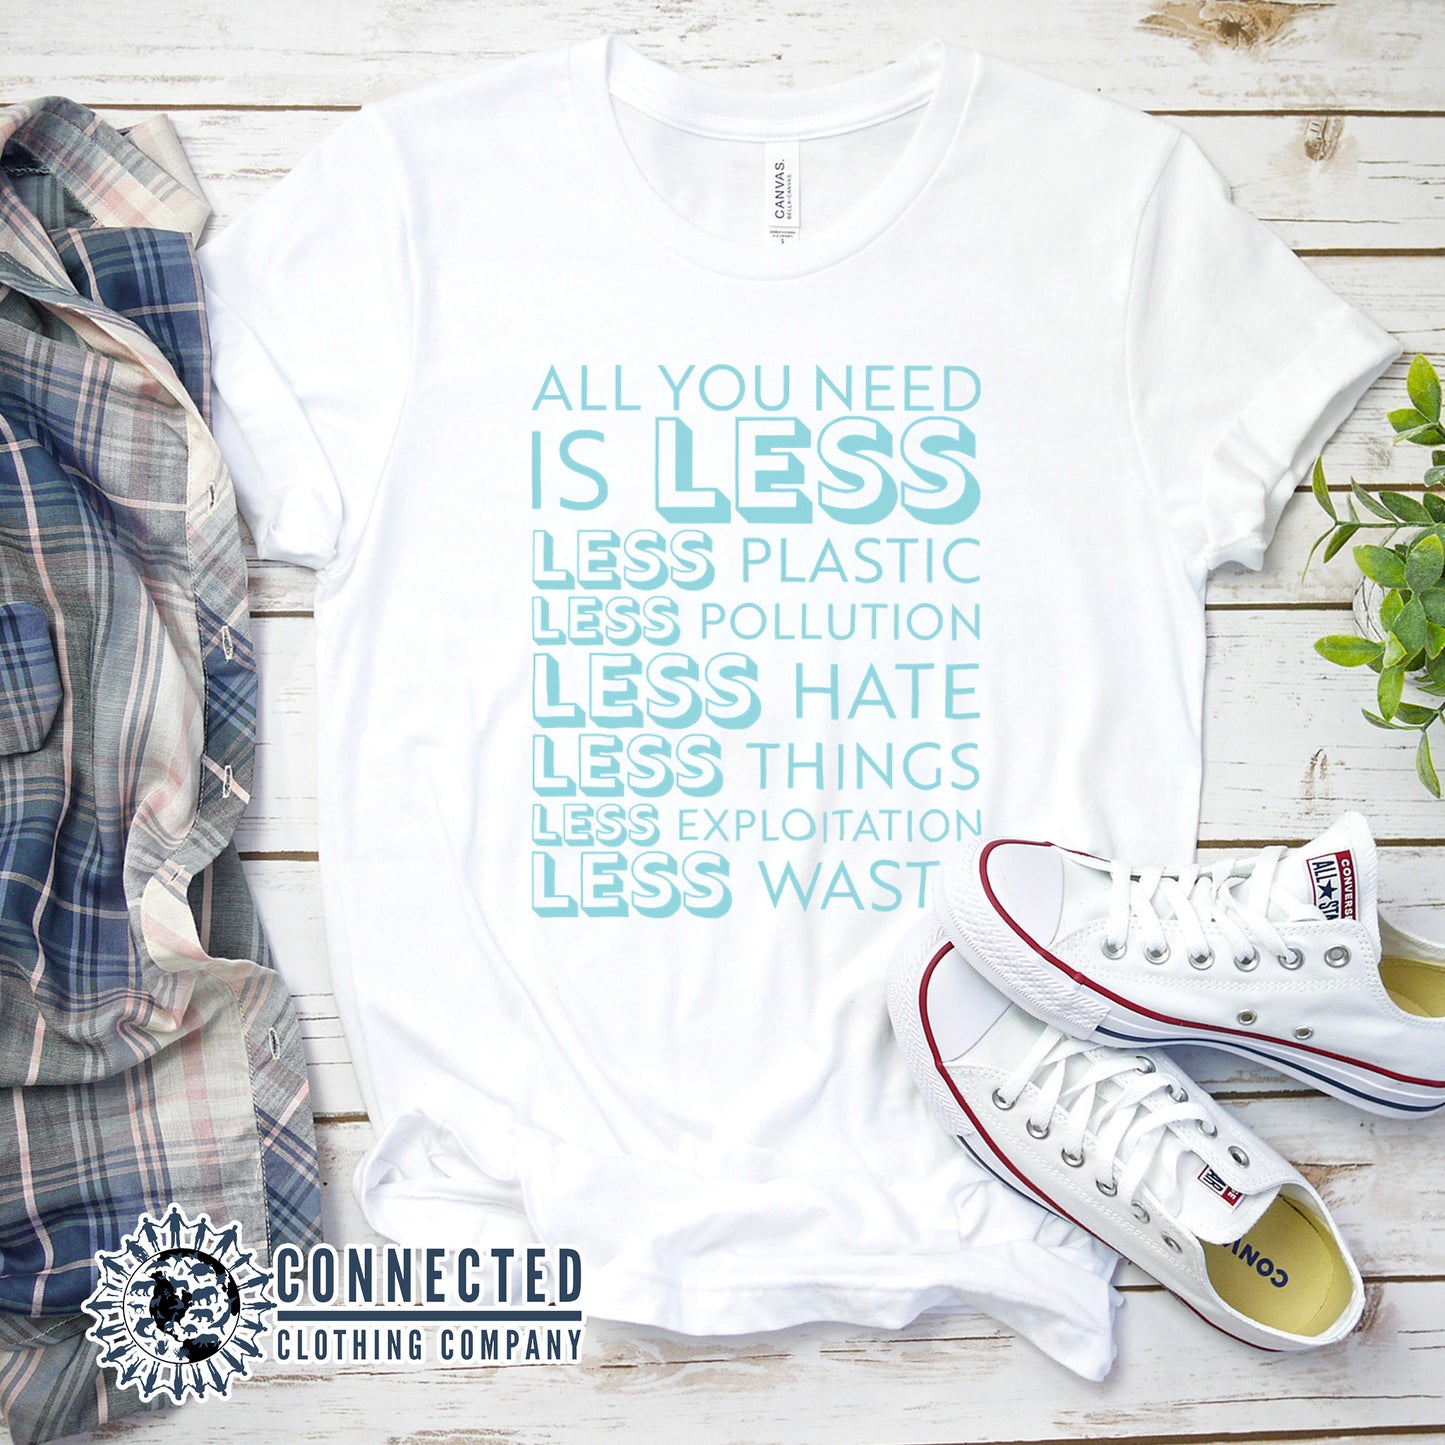 White All You Need Is Less Short-Sleeve Unisex Tee reads "all you need is less. less plastic. less pollution. less hate. less things. less exploitation. less waste." - Connected Clothing Company - Ethically and Sustainably Made - 10% of profits donated to Mission Blue ocean conservation